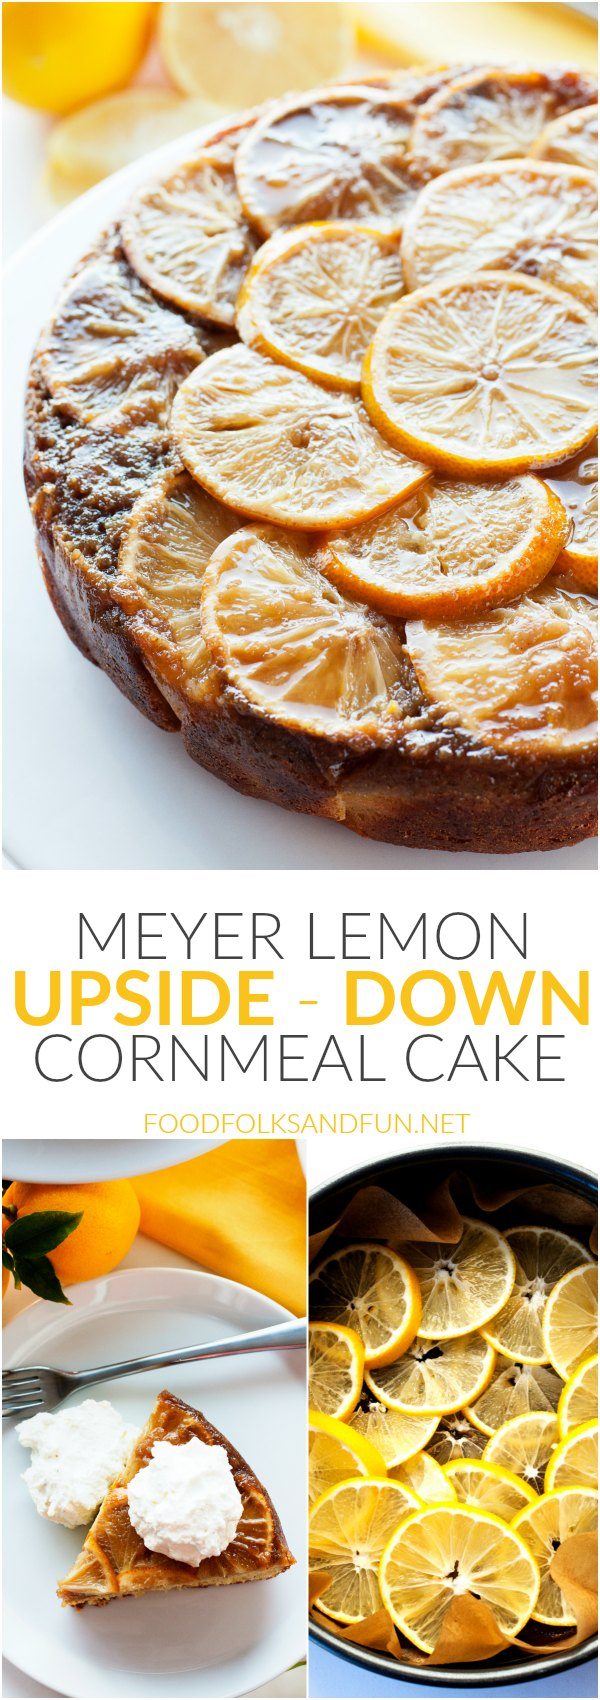 A collage of Meyer Lemon Upside Down Cornmeal Cake with text overlay for Pinterest